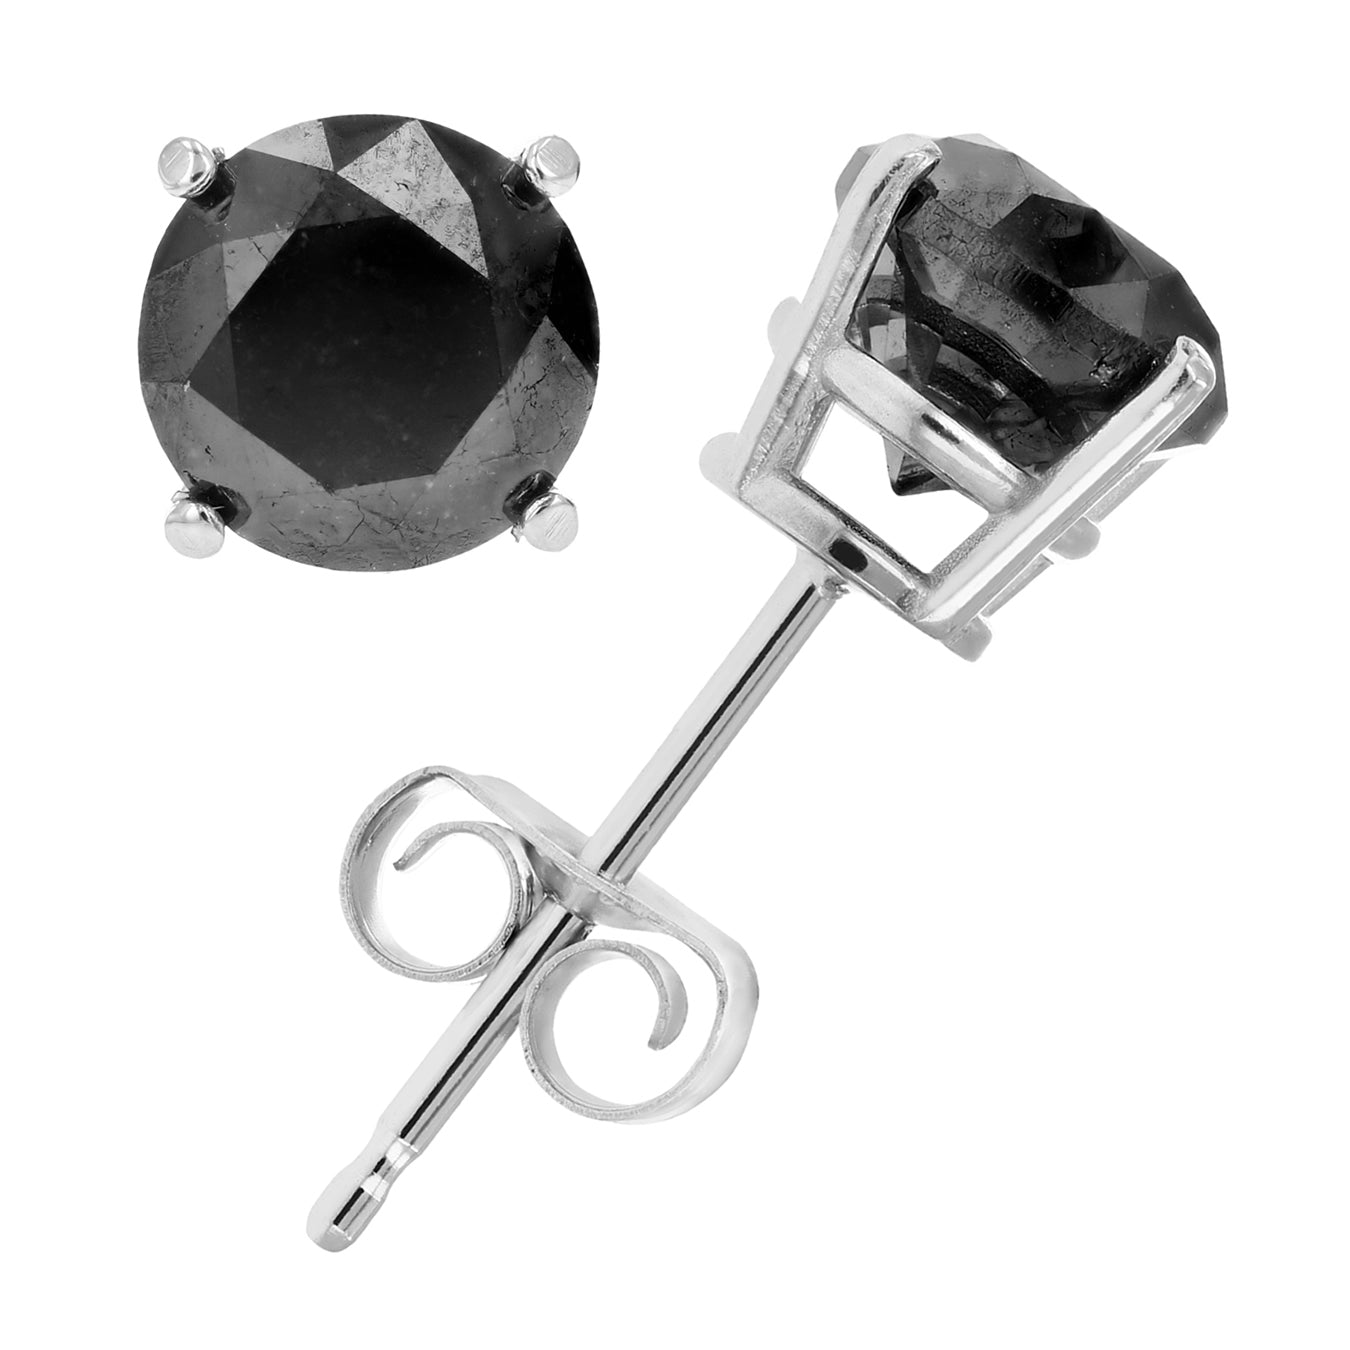 4.50 cttw Black Diamond Stud Earrings .925 Sterling Silver Round with Push Backs